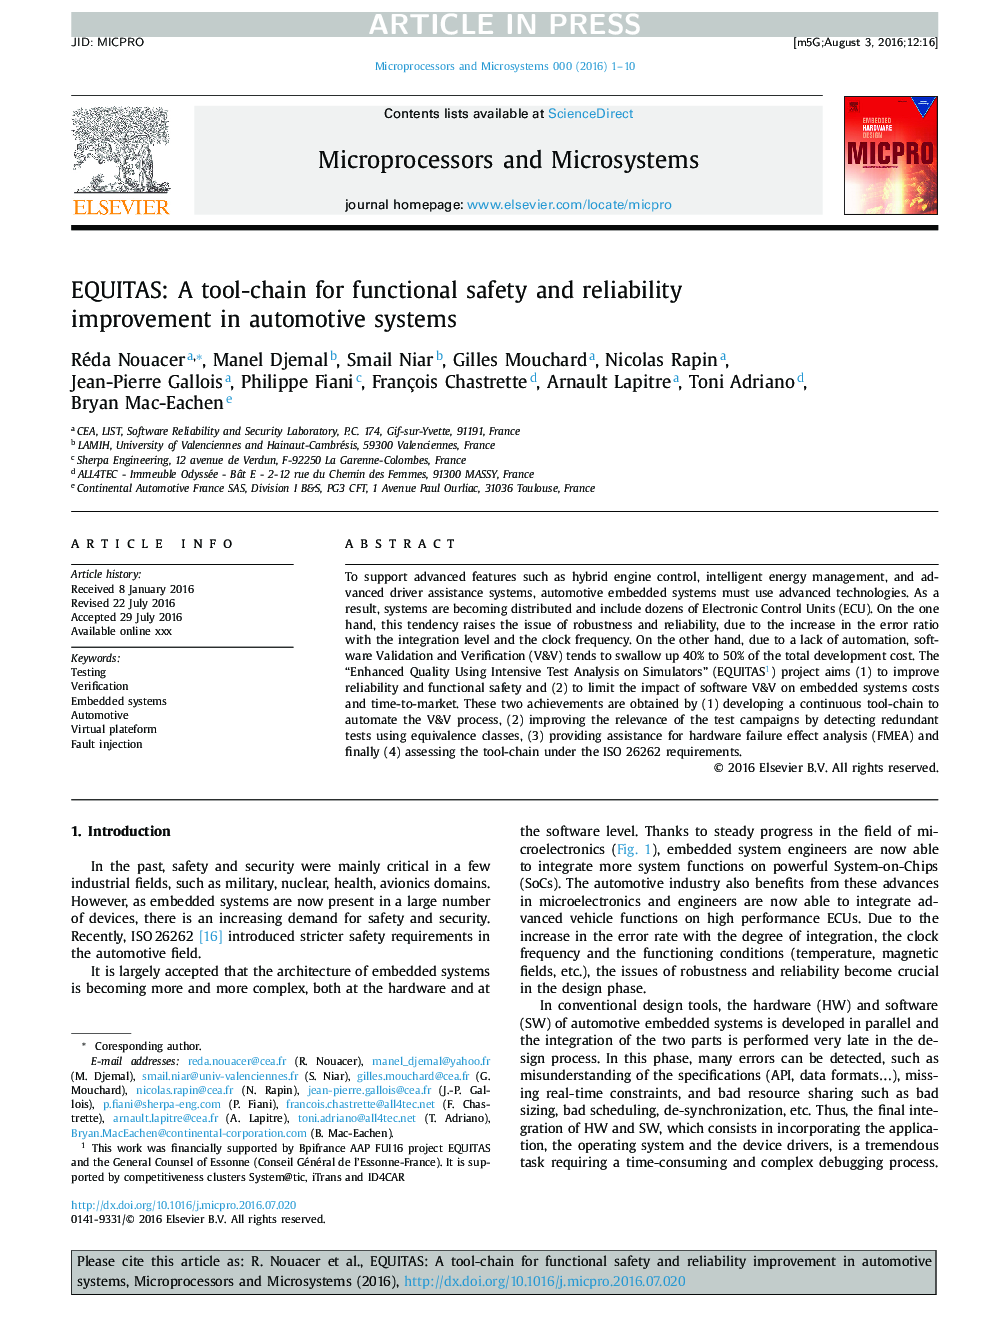 EQUITAS: A tool-chain for functional safety and reliability improvement in automotive systems